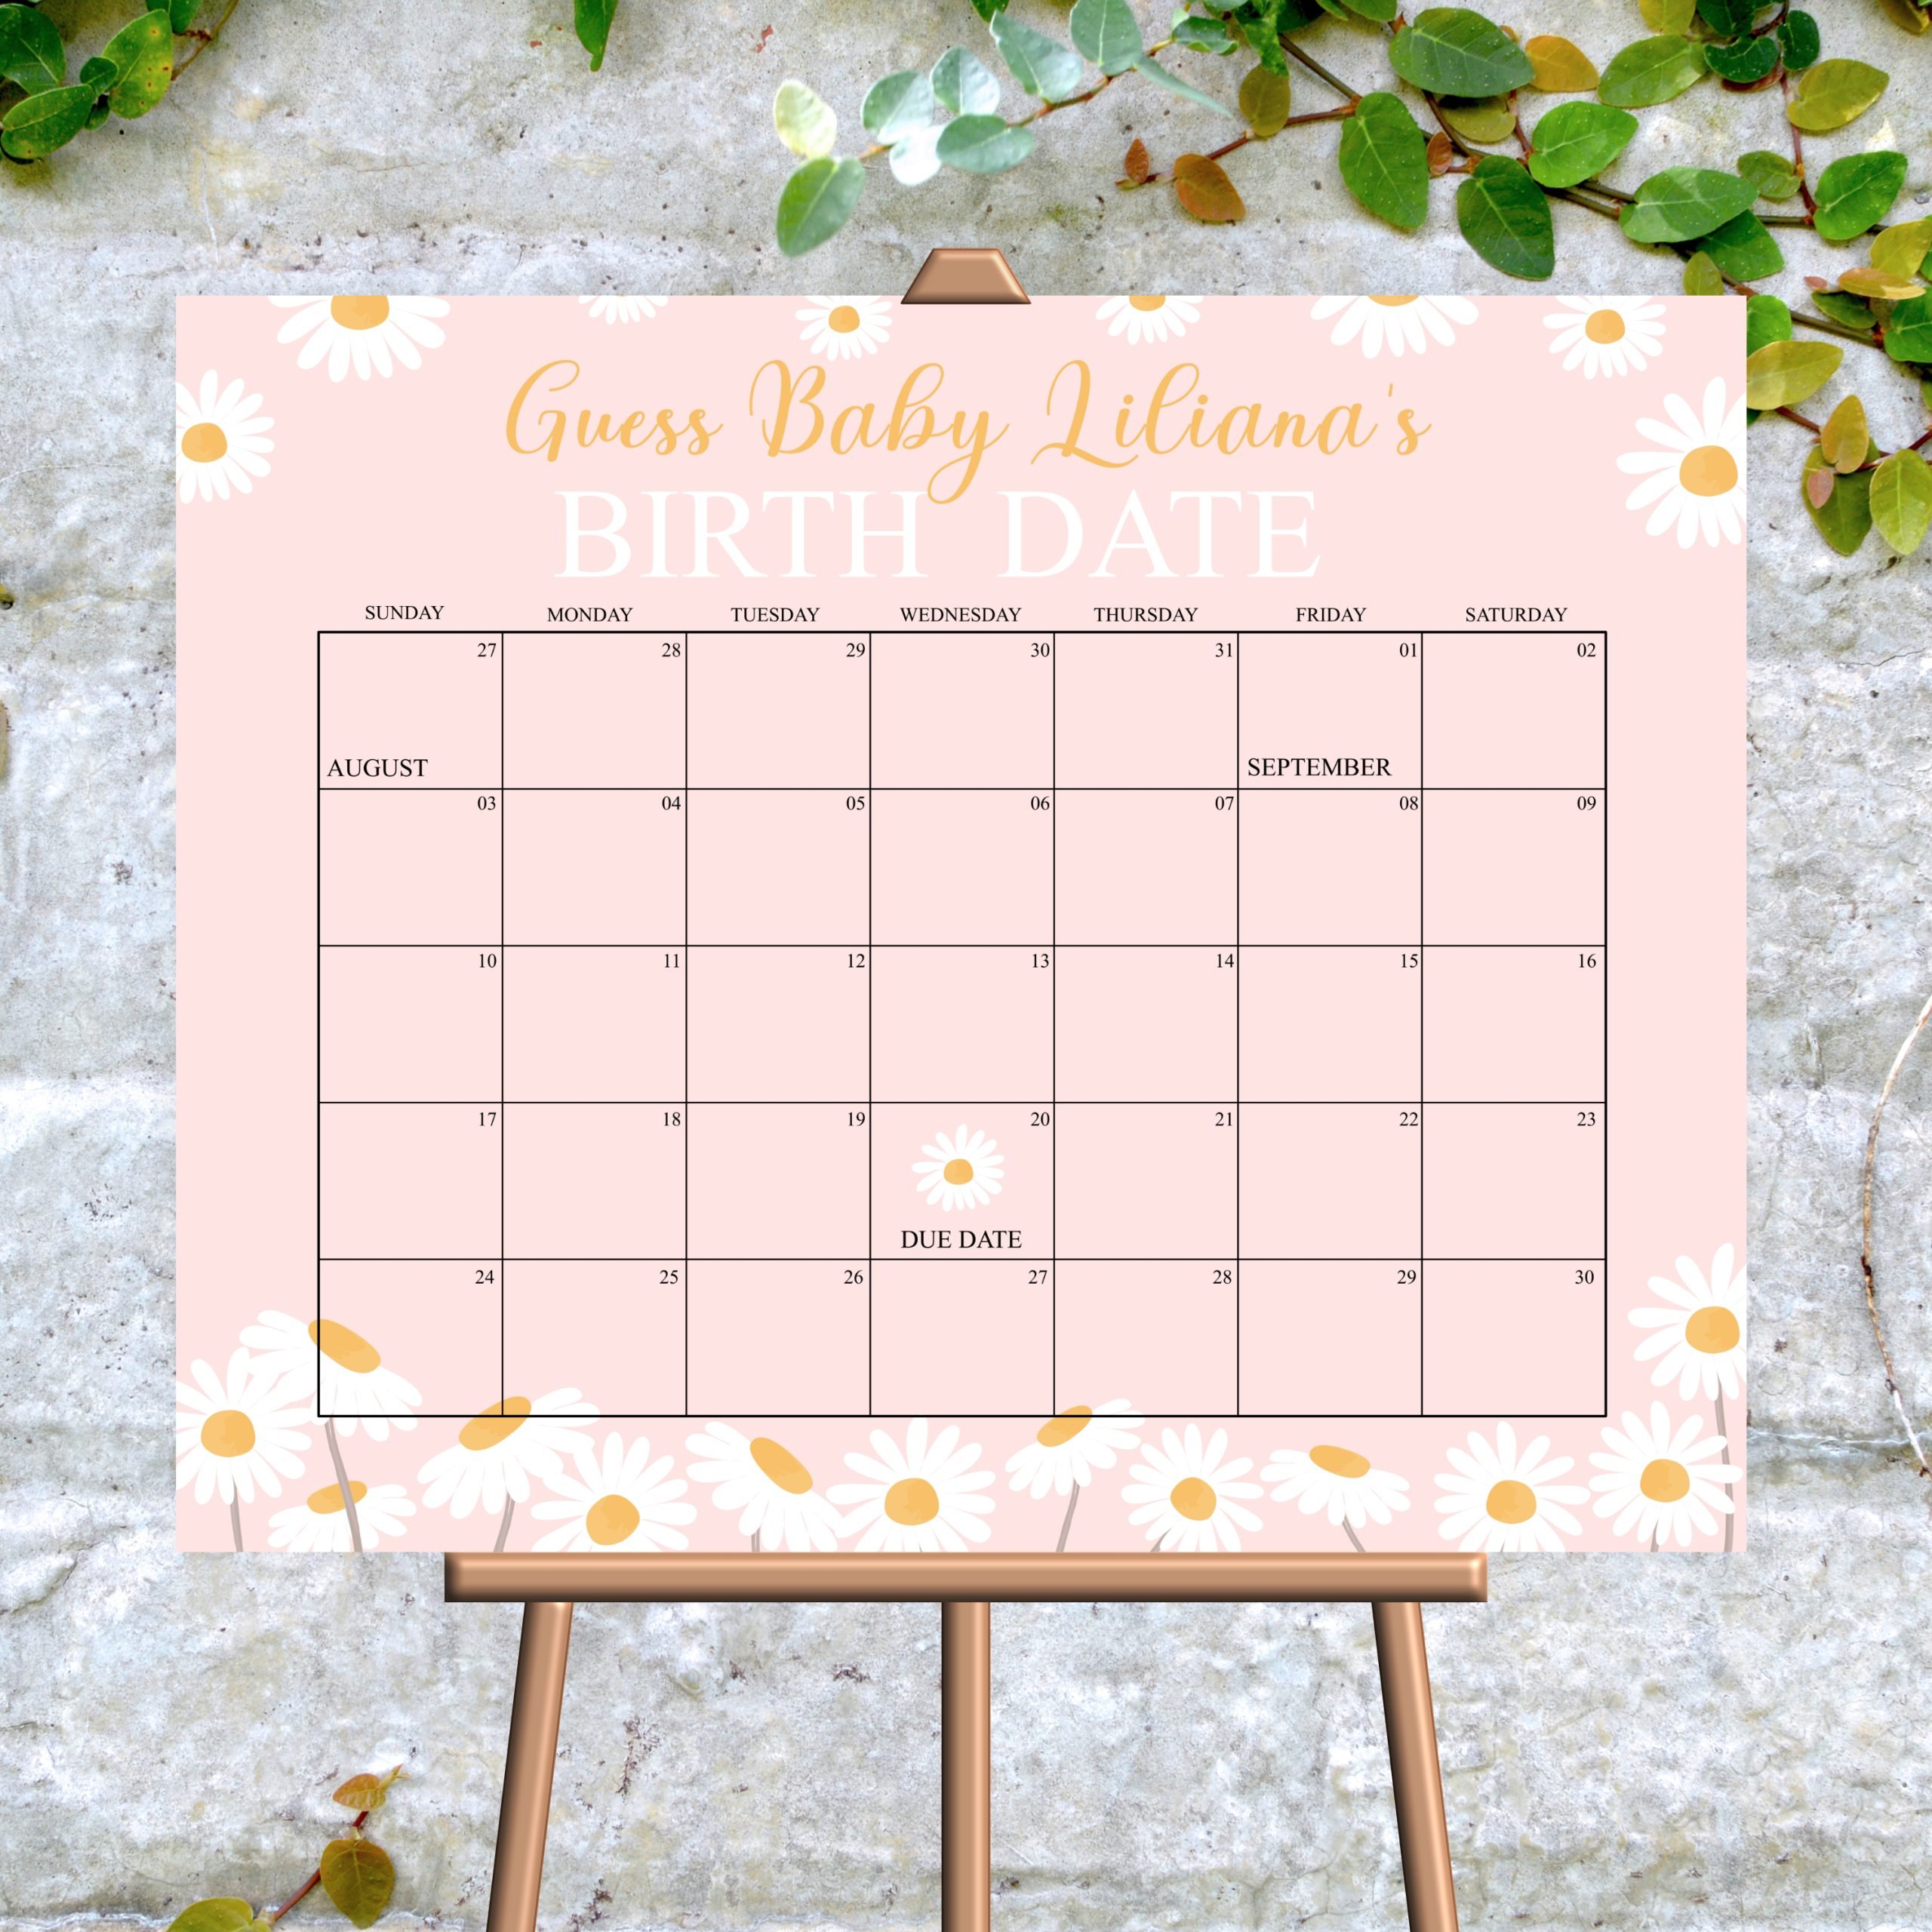 Baby Due Date Chart Game Editable Daisy Baby Due Date Calendar Game, PRINTABLE, Guess Baby’s Birth Date Baby Due Date Guessing Game Printable